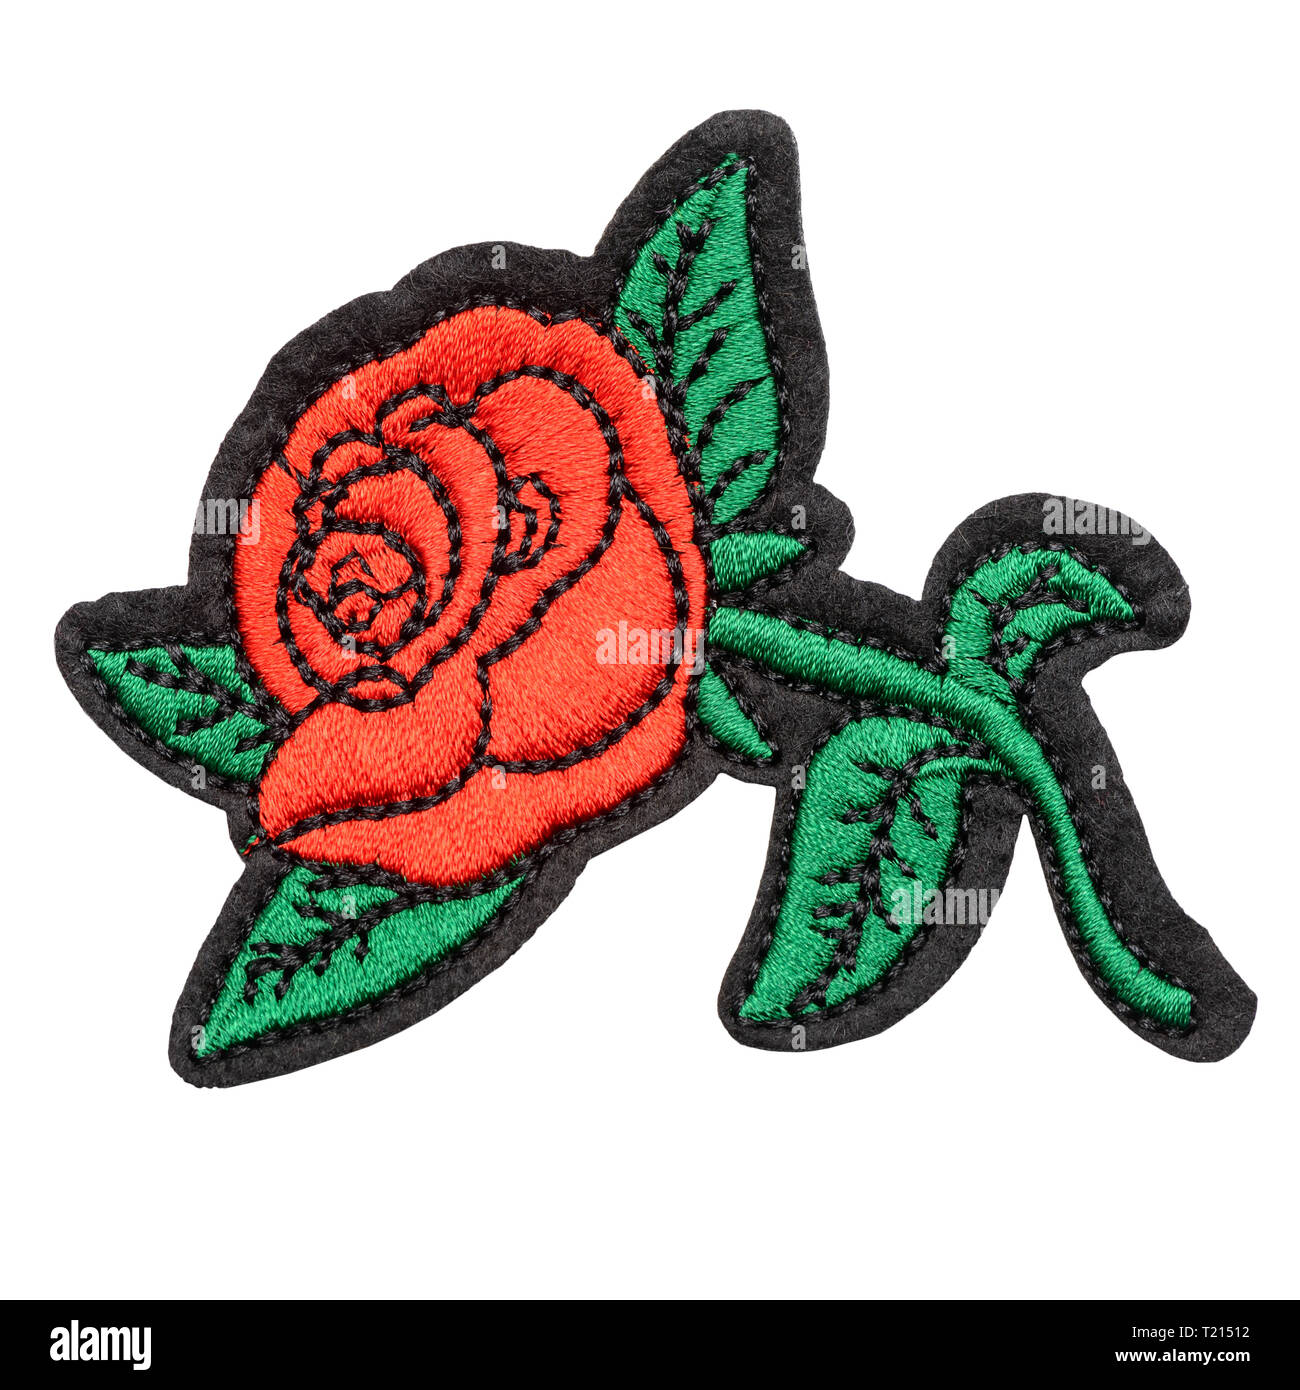 POPPY DAISY SUMMER FLOWER  4' 10cm SEW IRON ON  PATCH BADGE EMBROIDERY APPLIQUE 